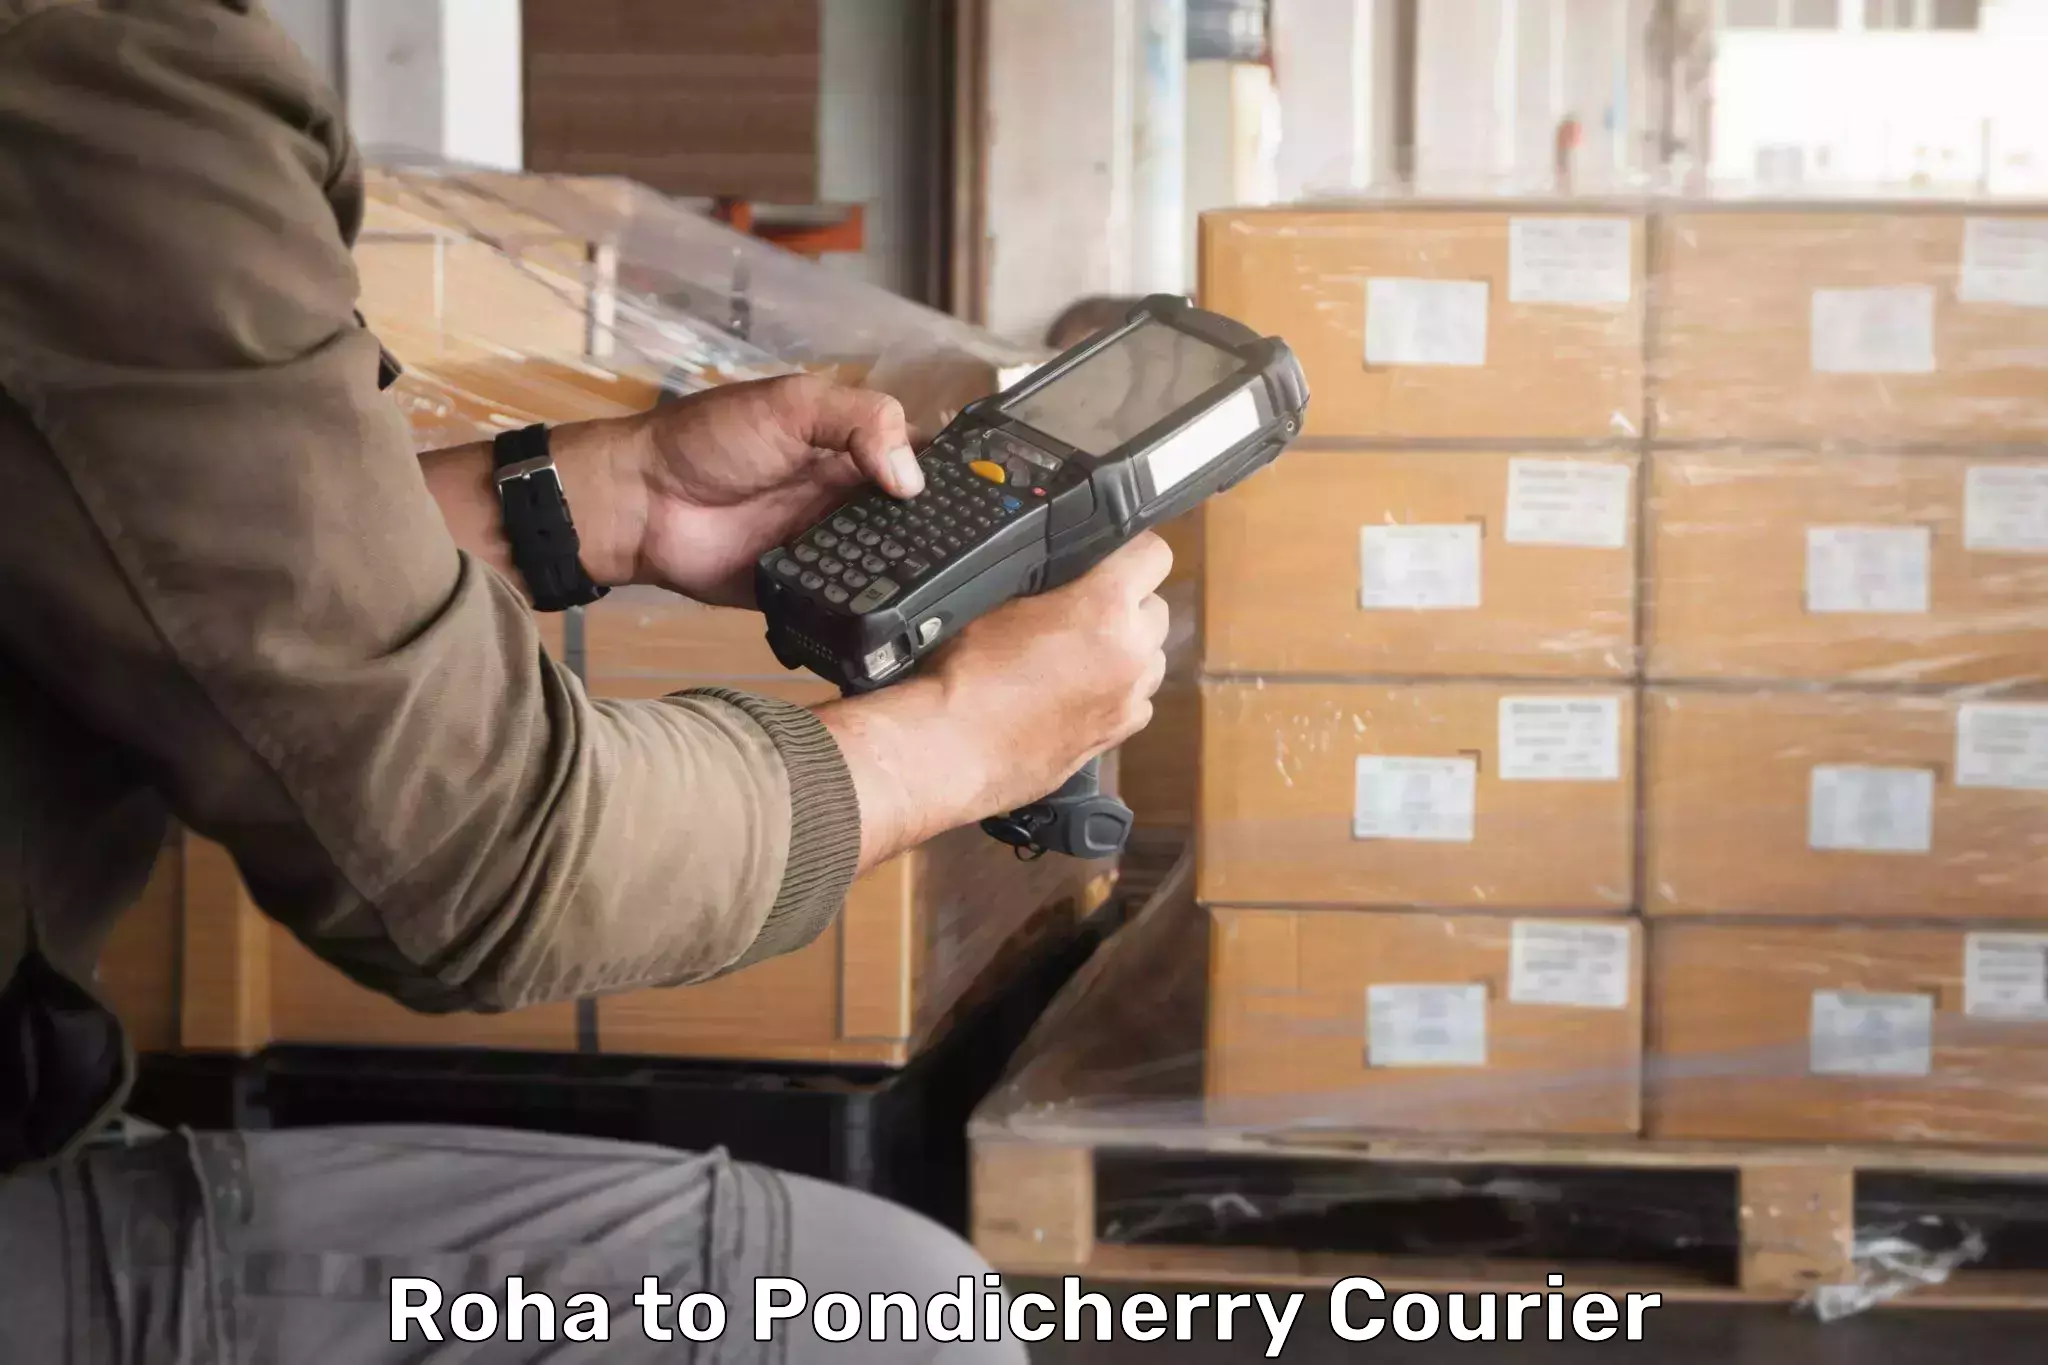 Reliable package handling Roha to Pondicherry